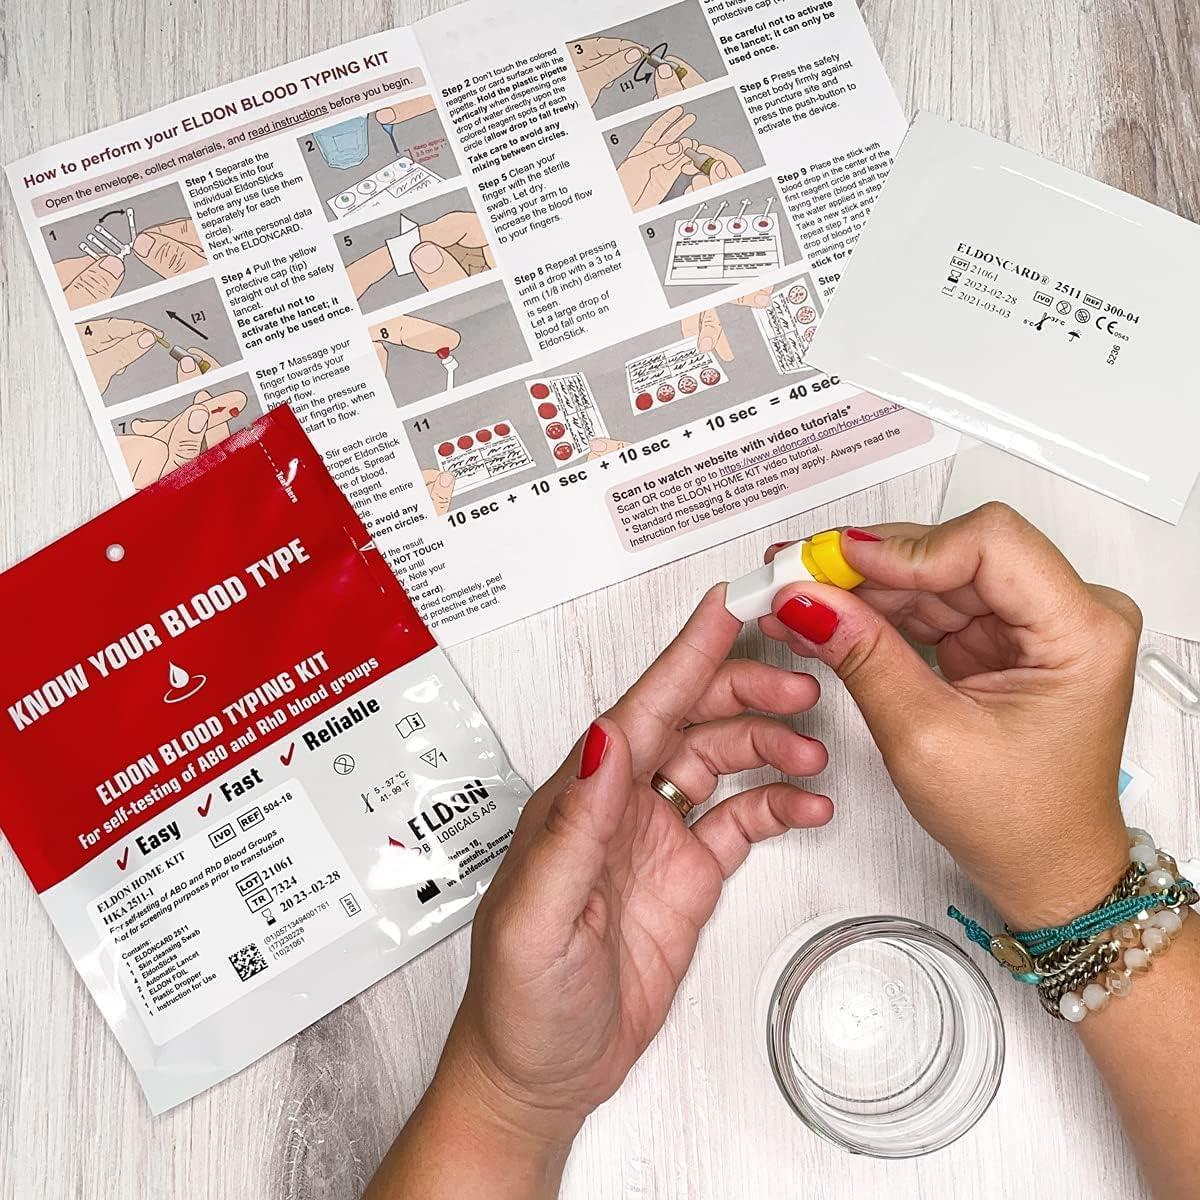  Eldoncard Blood Typing Kit, 3 Tests, Know Your Blood Type,  Instant Home Testing Kit, A, O, B, Rhs-D Negative and Positive Blood Types  Tested For : Health & Household